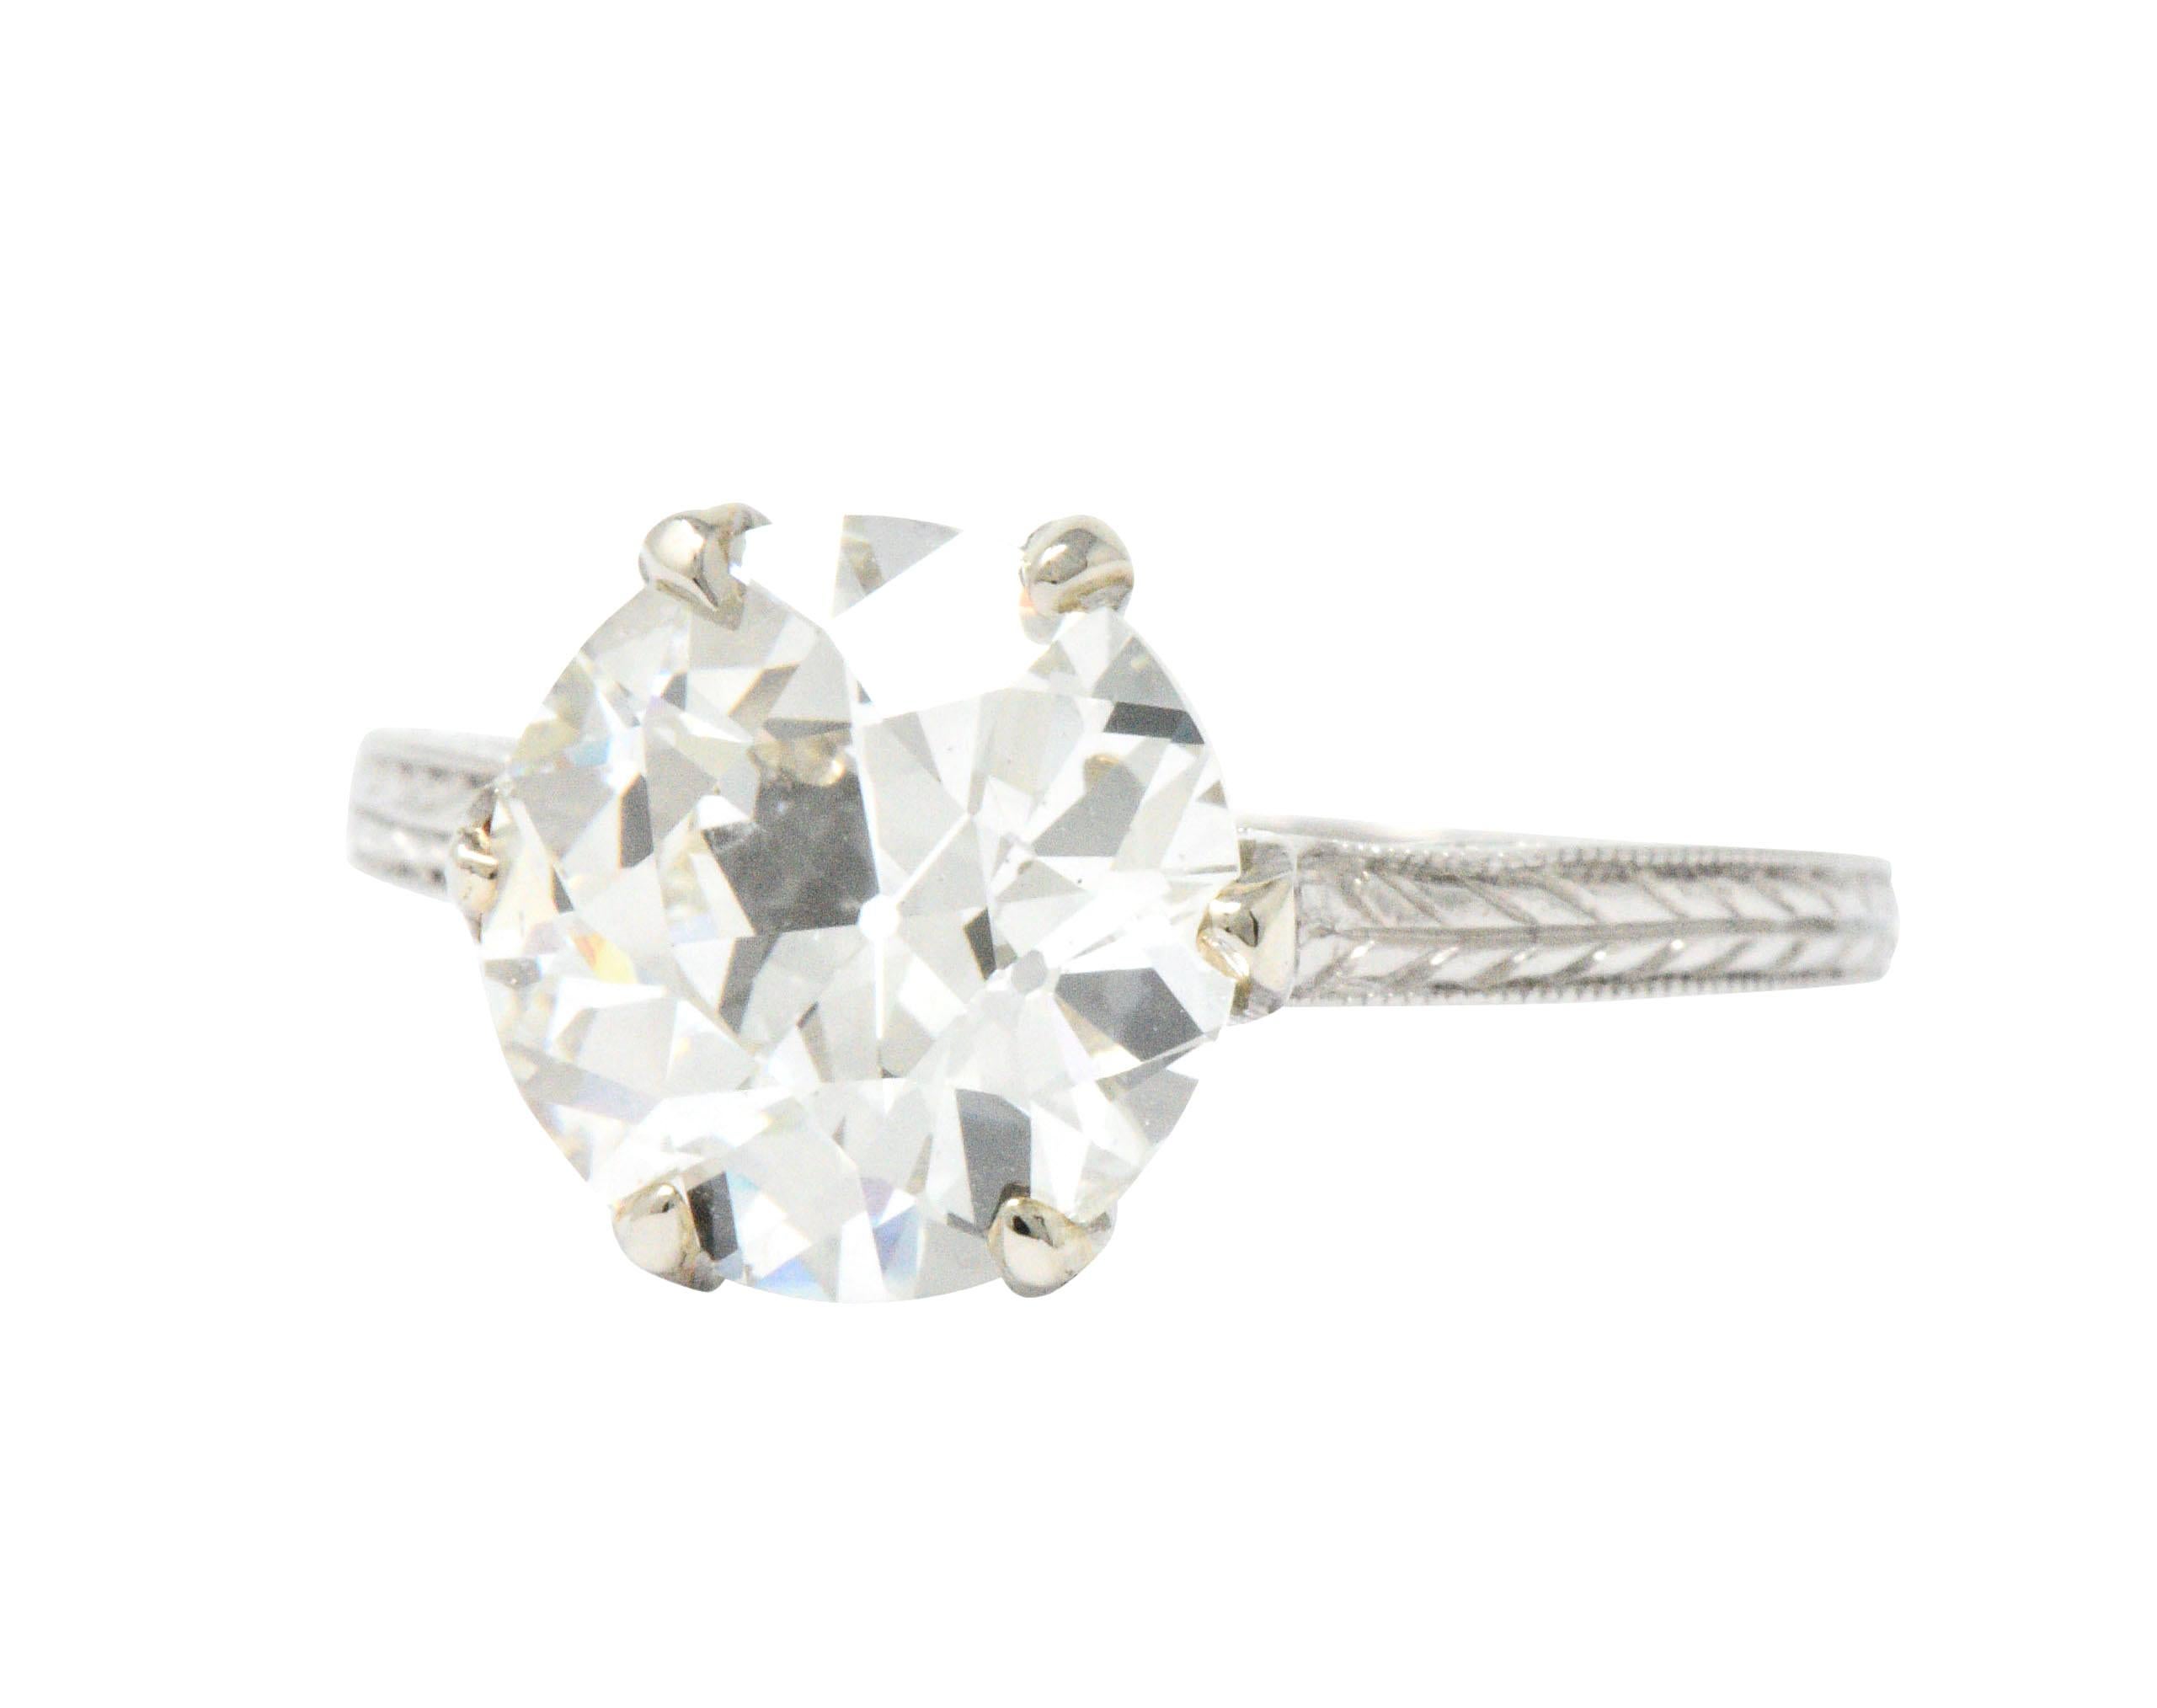 Centering a 2.65 carat old European cut diamond, J color and SI1 clarity

Art Deco platinum mount circa 1930

Top of the ring measures 9.9 mm and sits 6.5 mm high

Ring Size: 5.75 and Sizable

Total Weight: 2.8 Grams

GIA report: 196141972